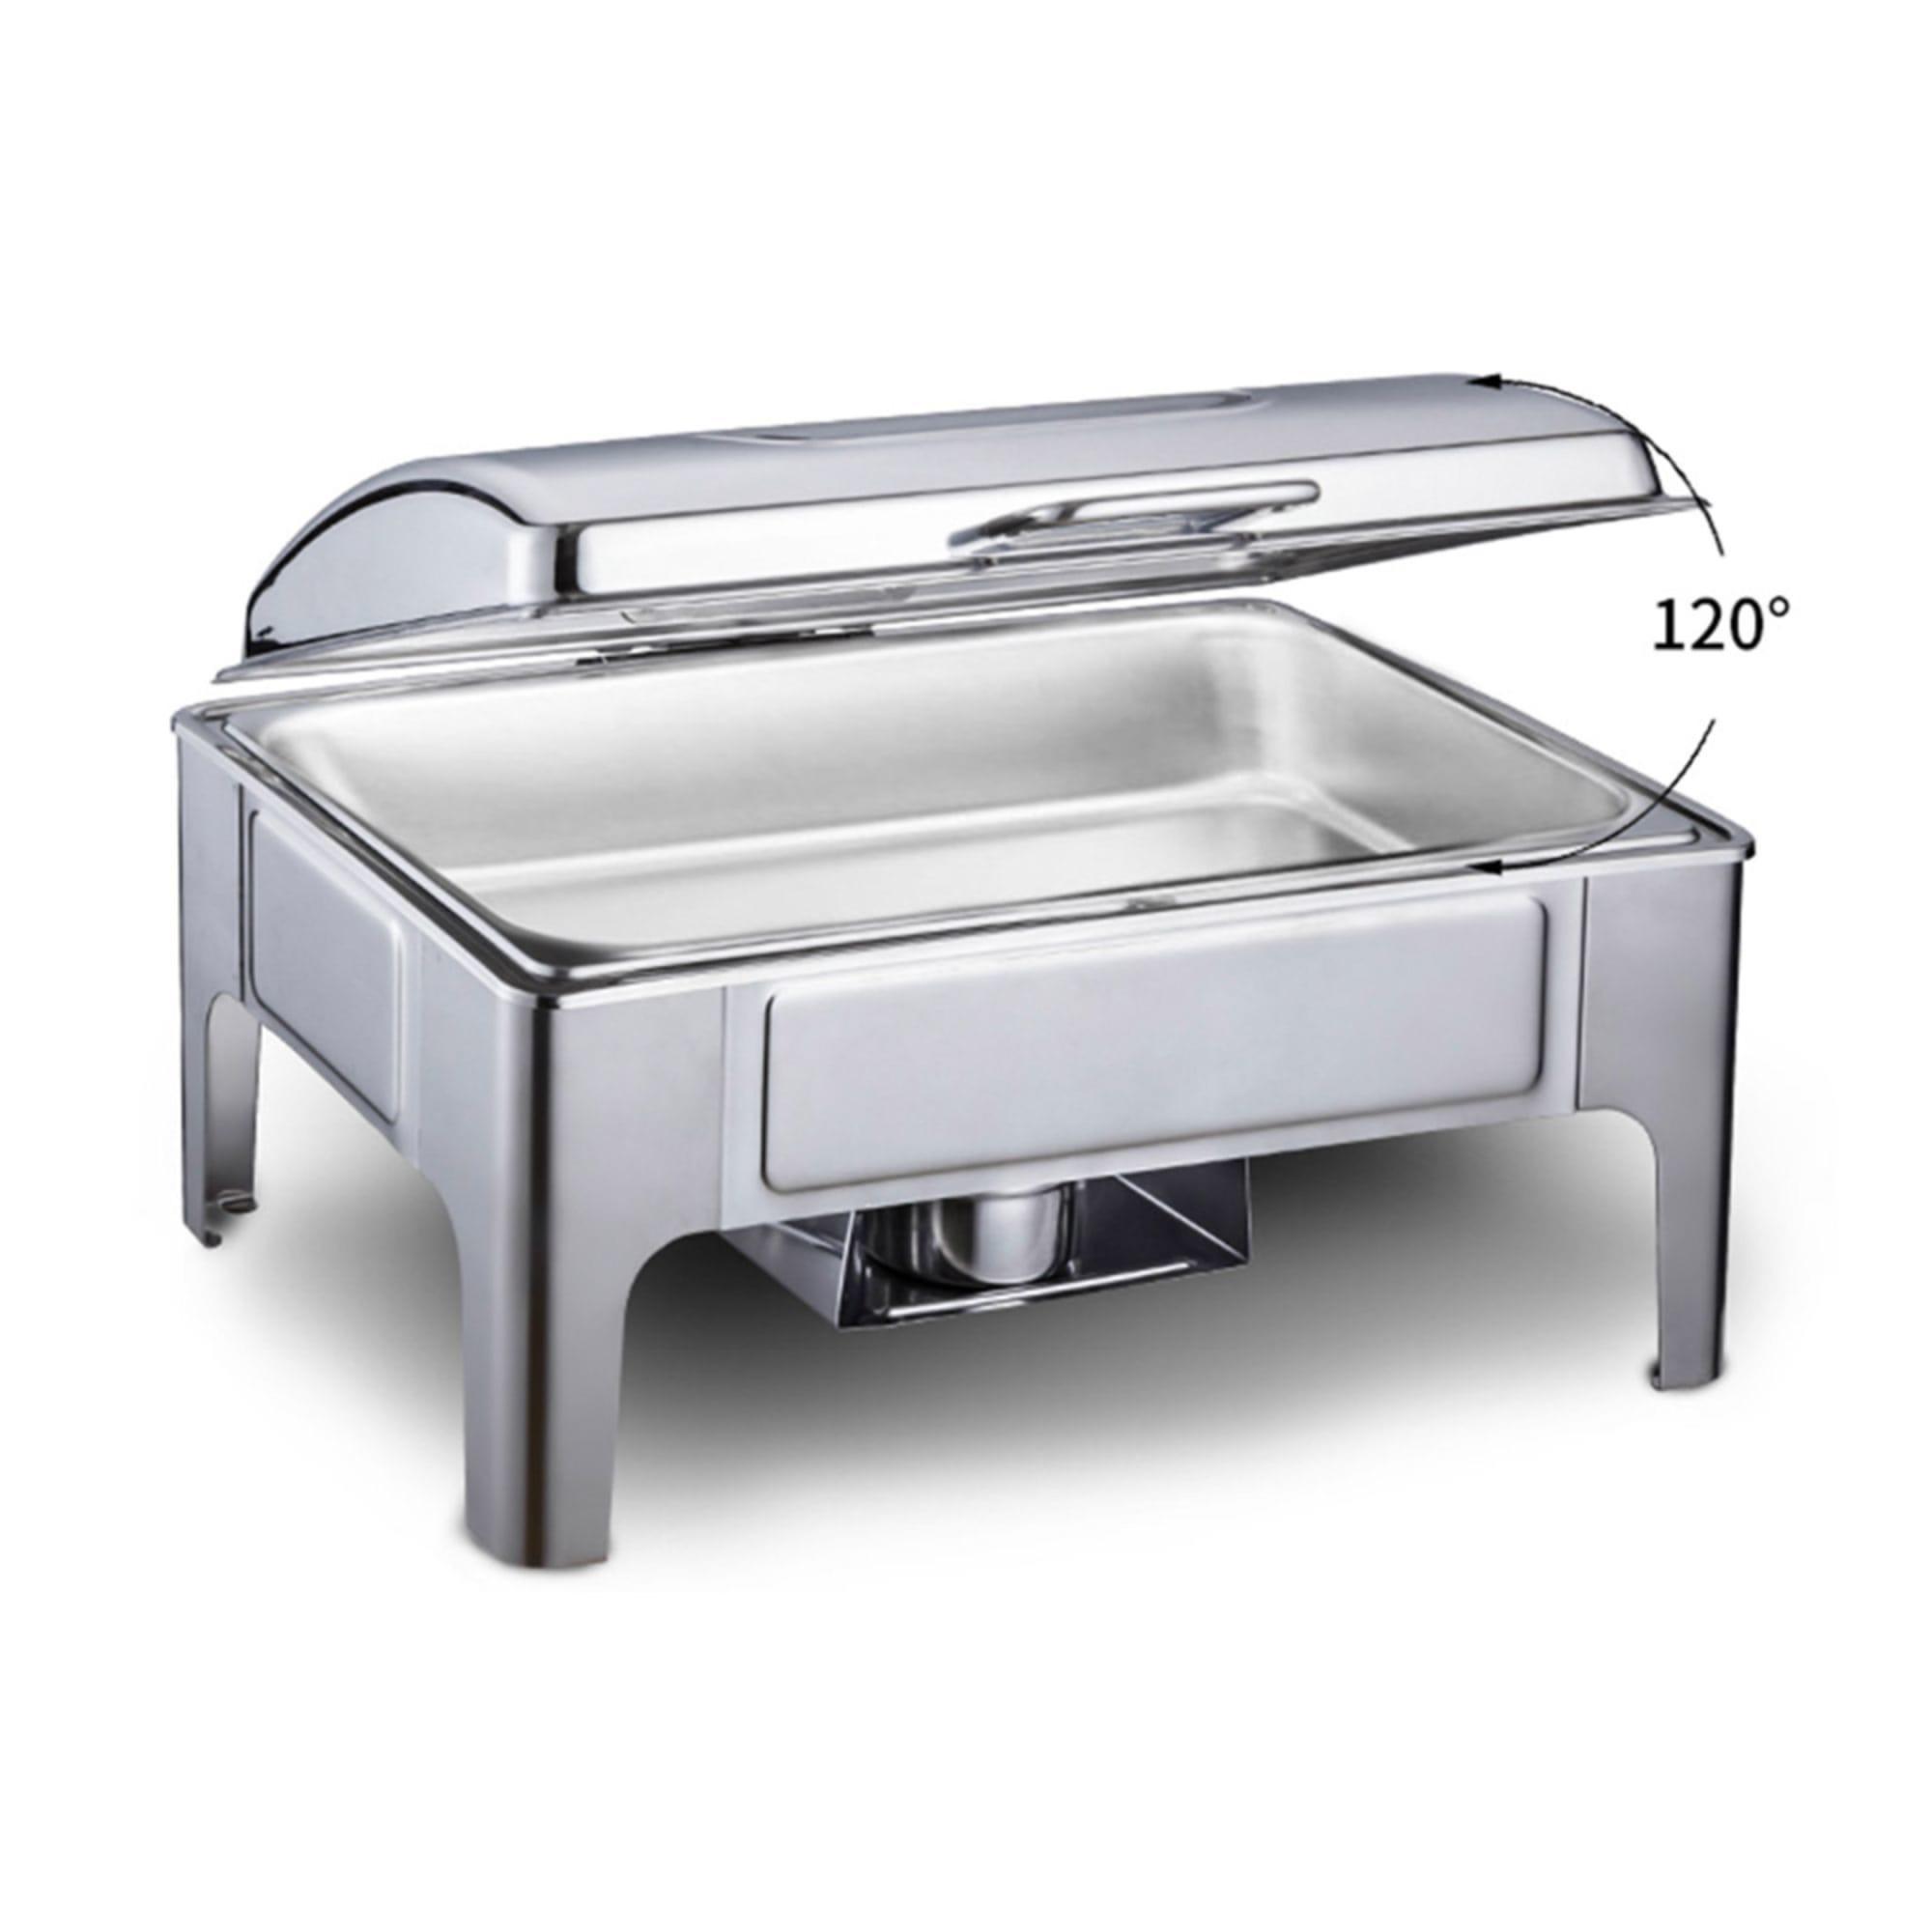 Soga Rectangular Stainless Steel Chafing Dish with Window Lid Set of 2 Image 5